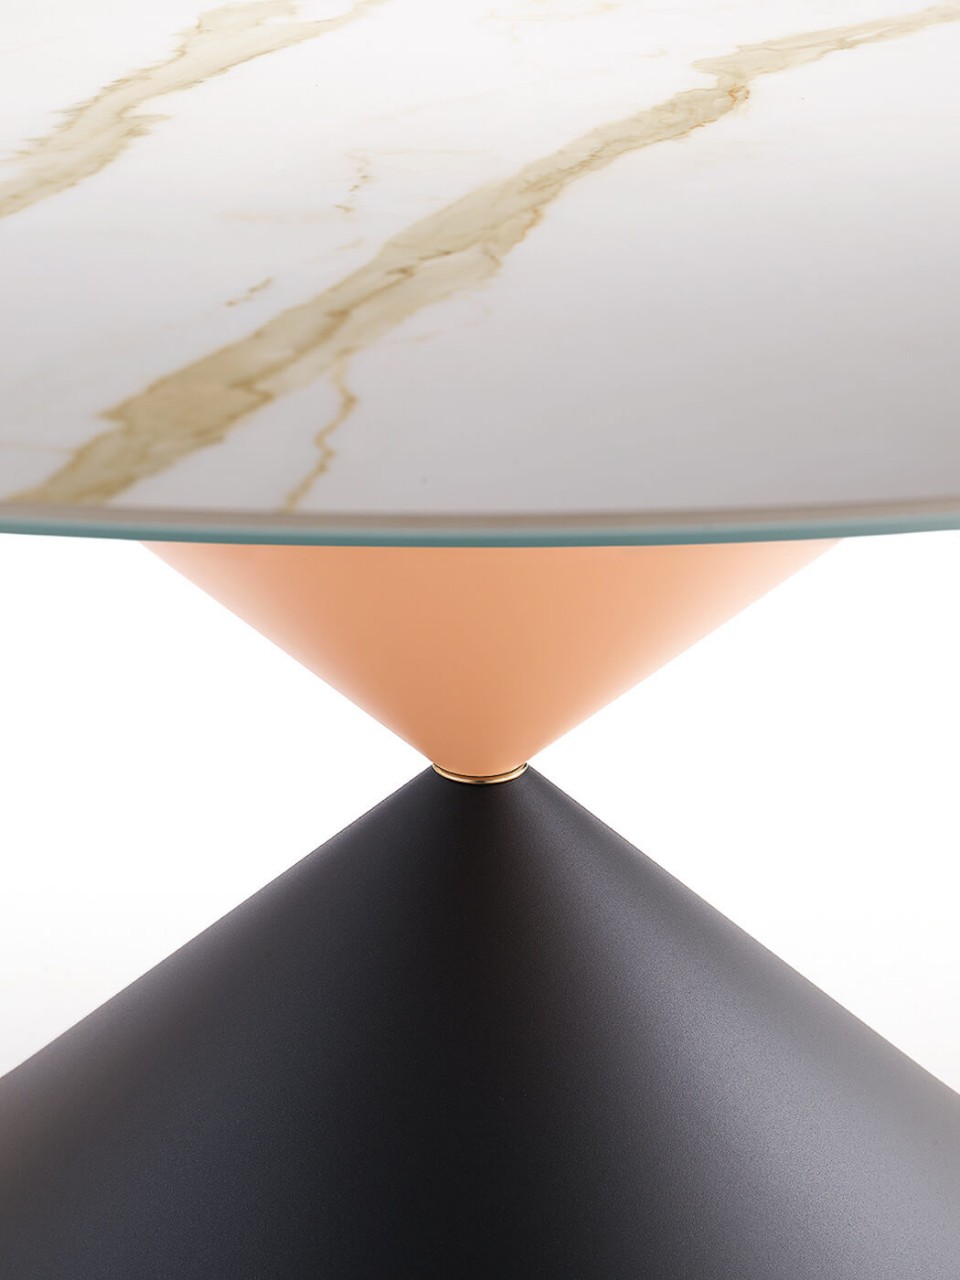 Round table 150 cm diameter Clessidra with metal base in graphite and rose finish with metallic insert in rose gold finish, crystalceramic top